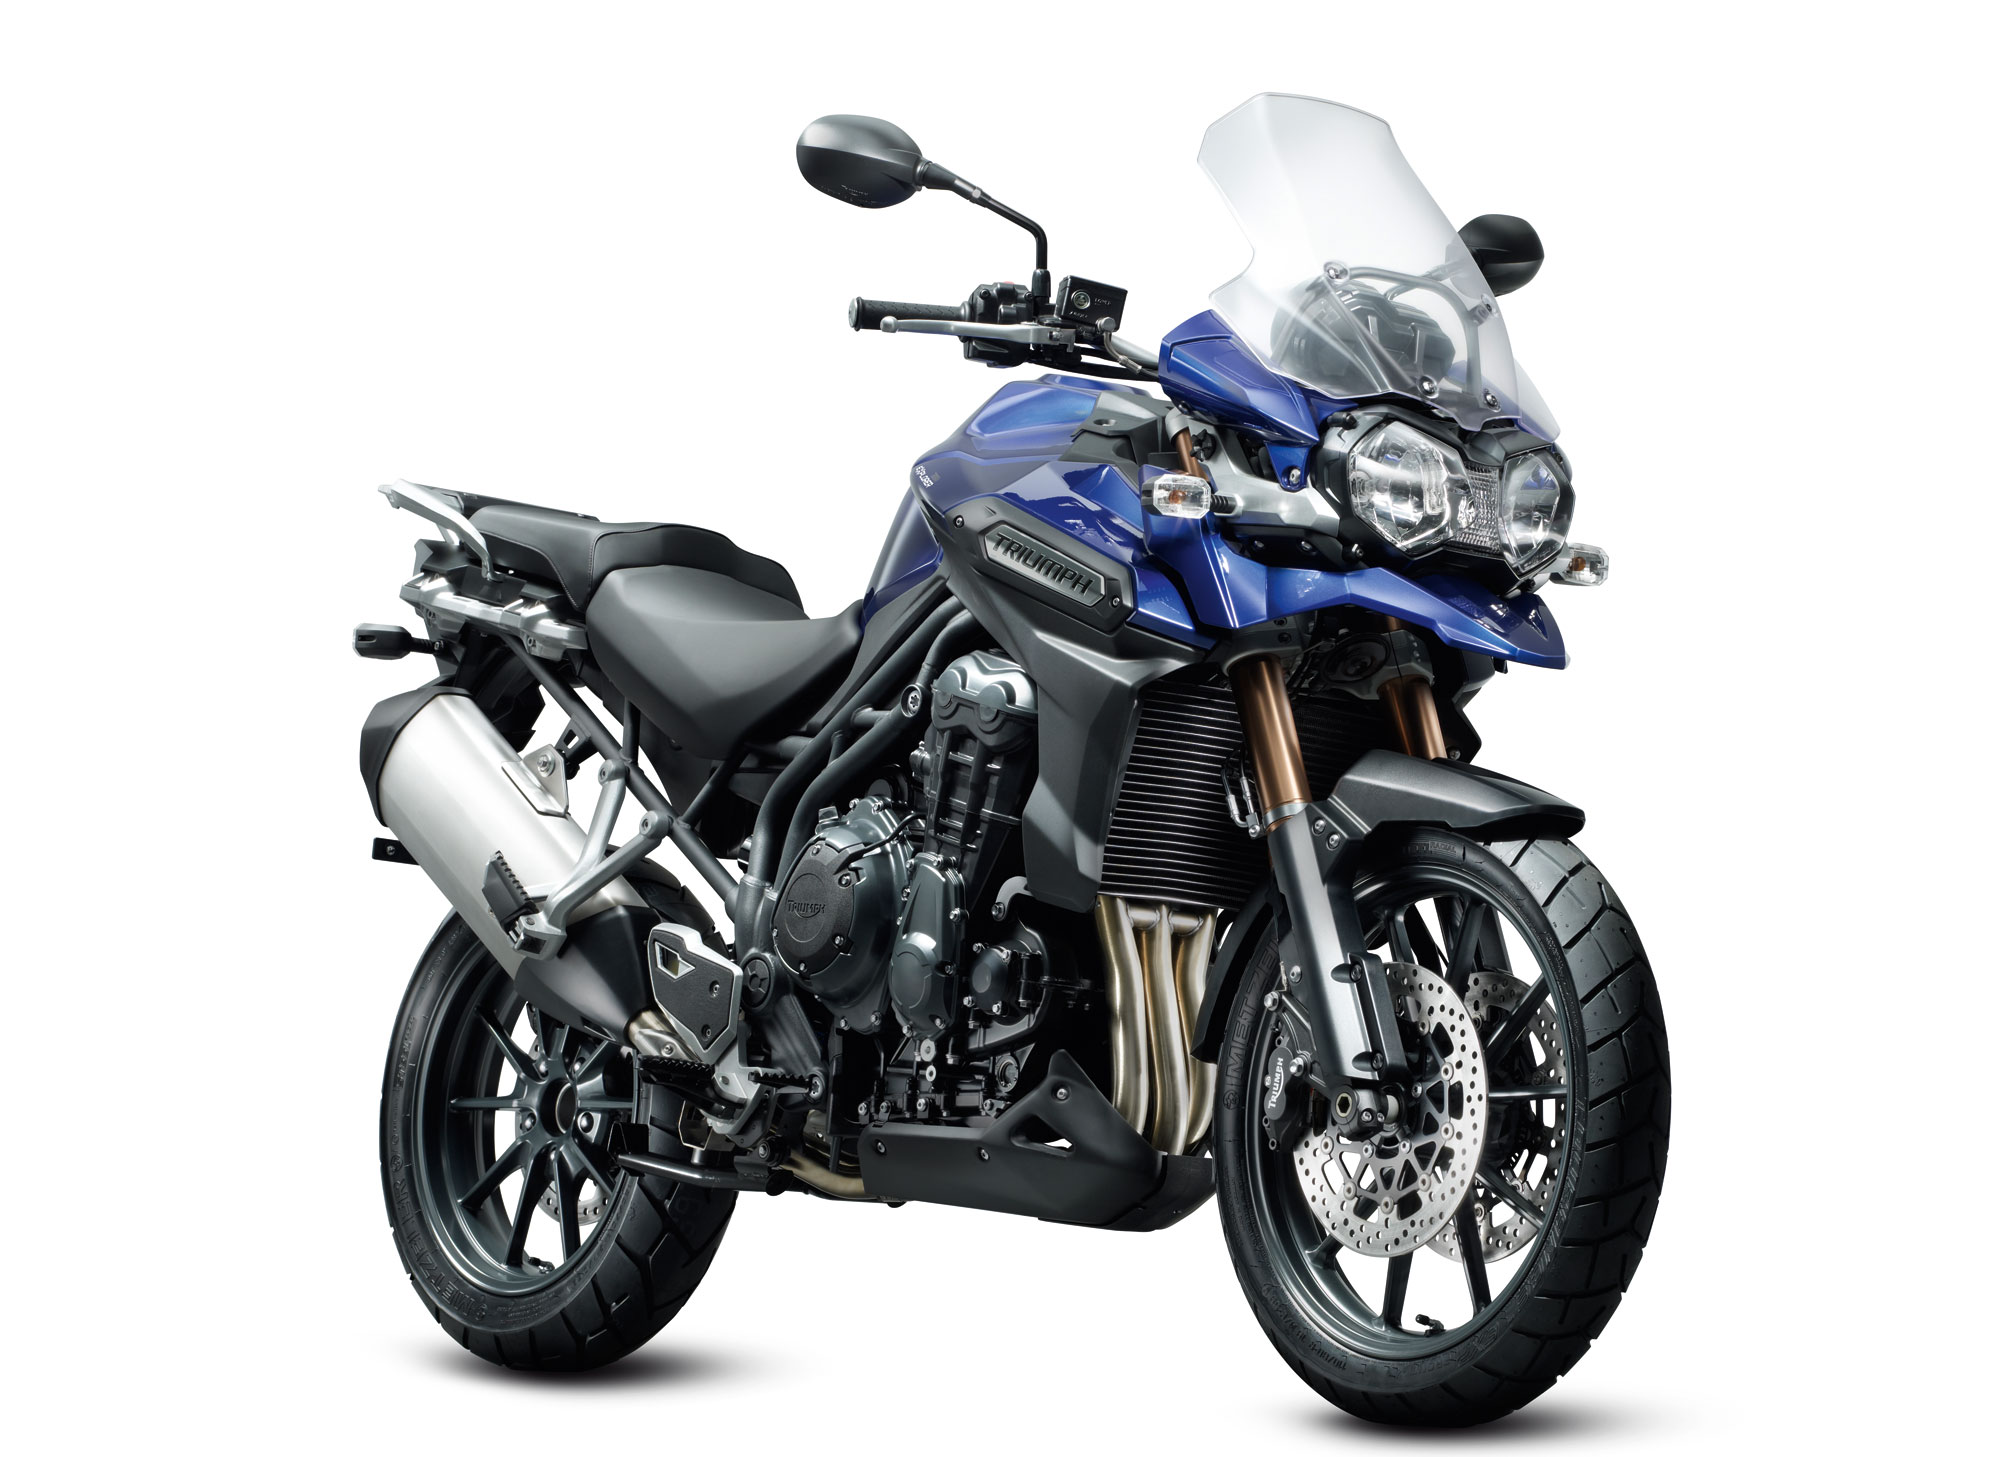 TRIUMPH TIGER 1200 GT PRO 2022  on Review  MCN